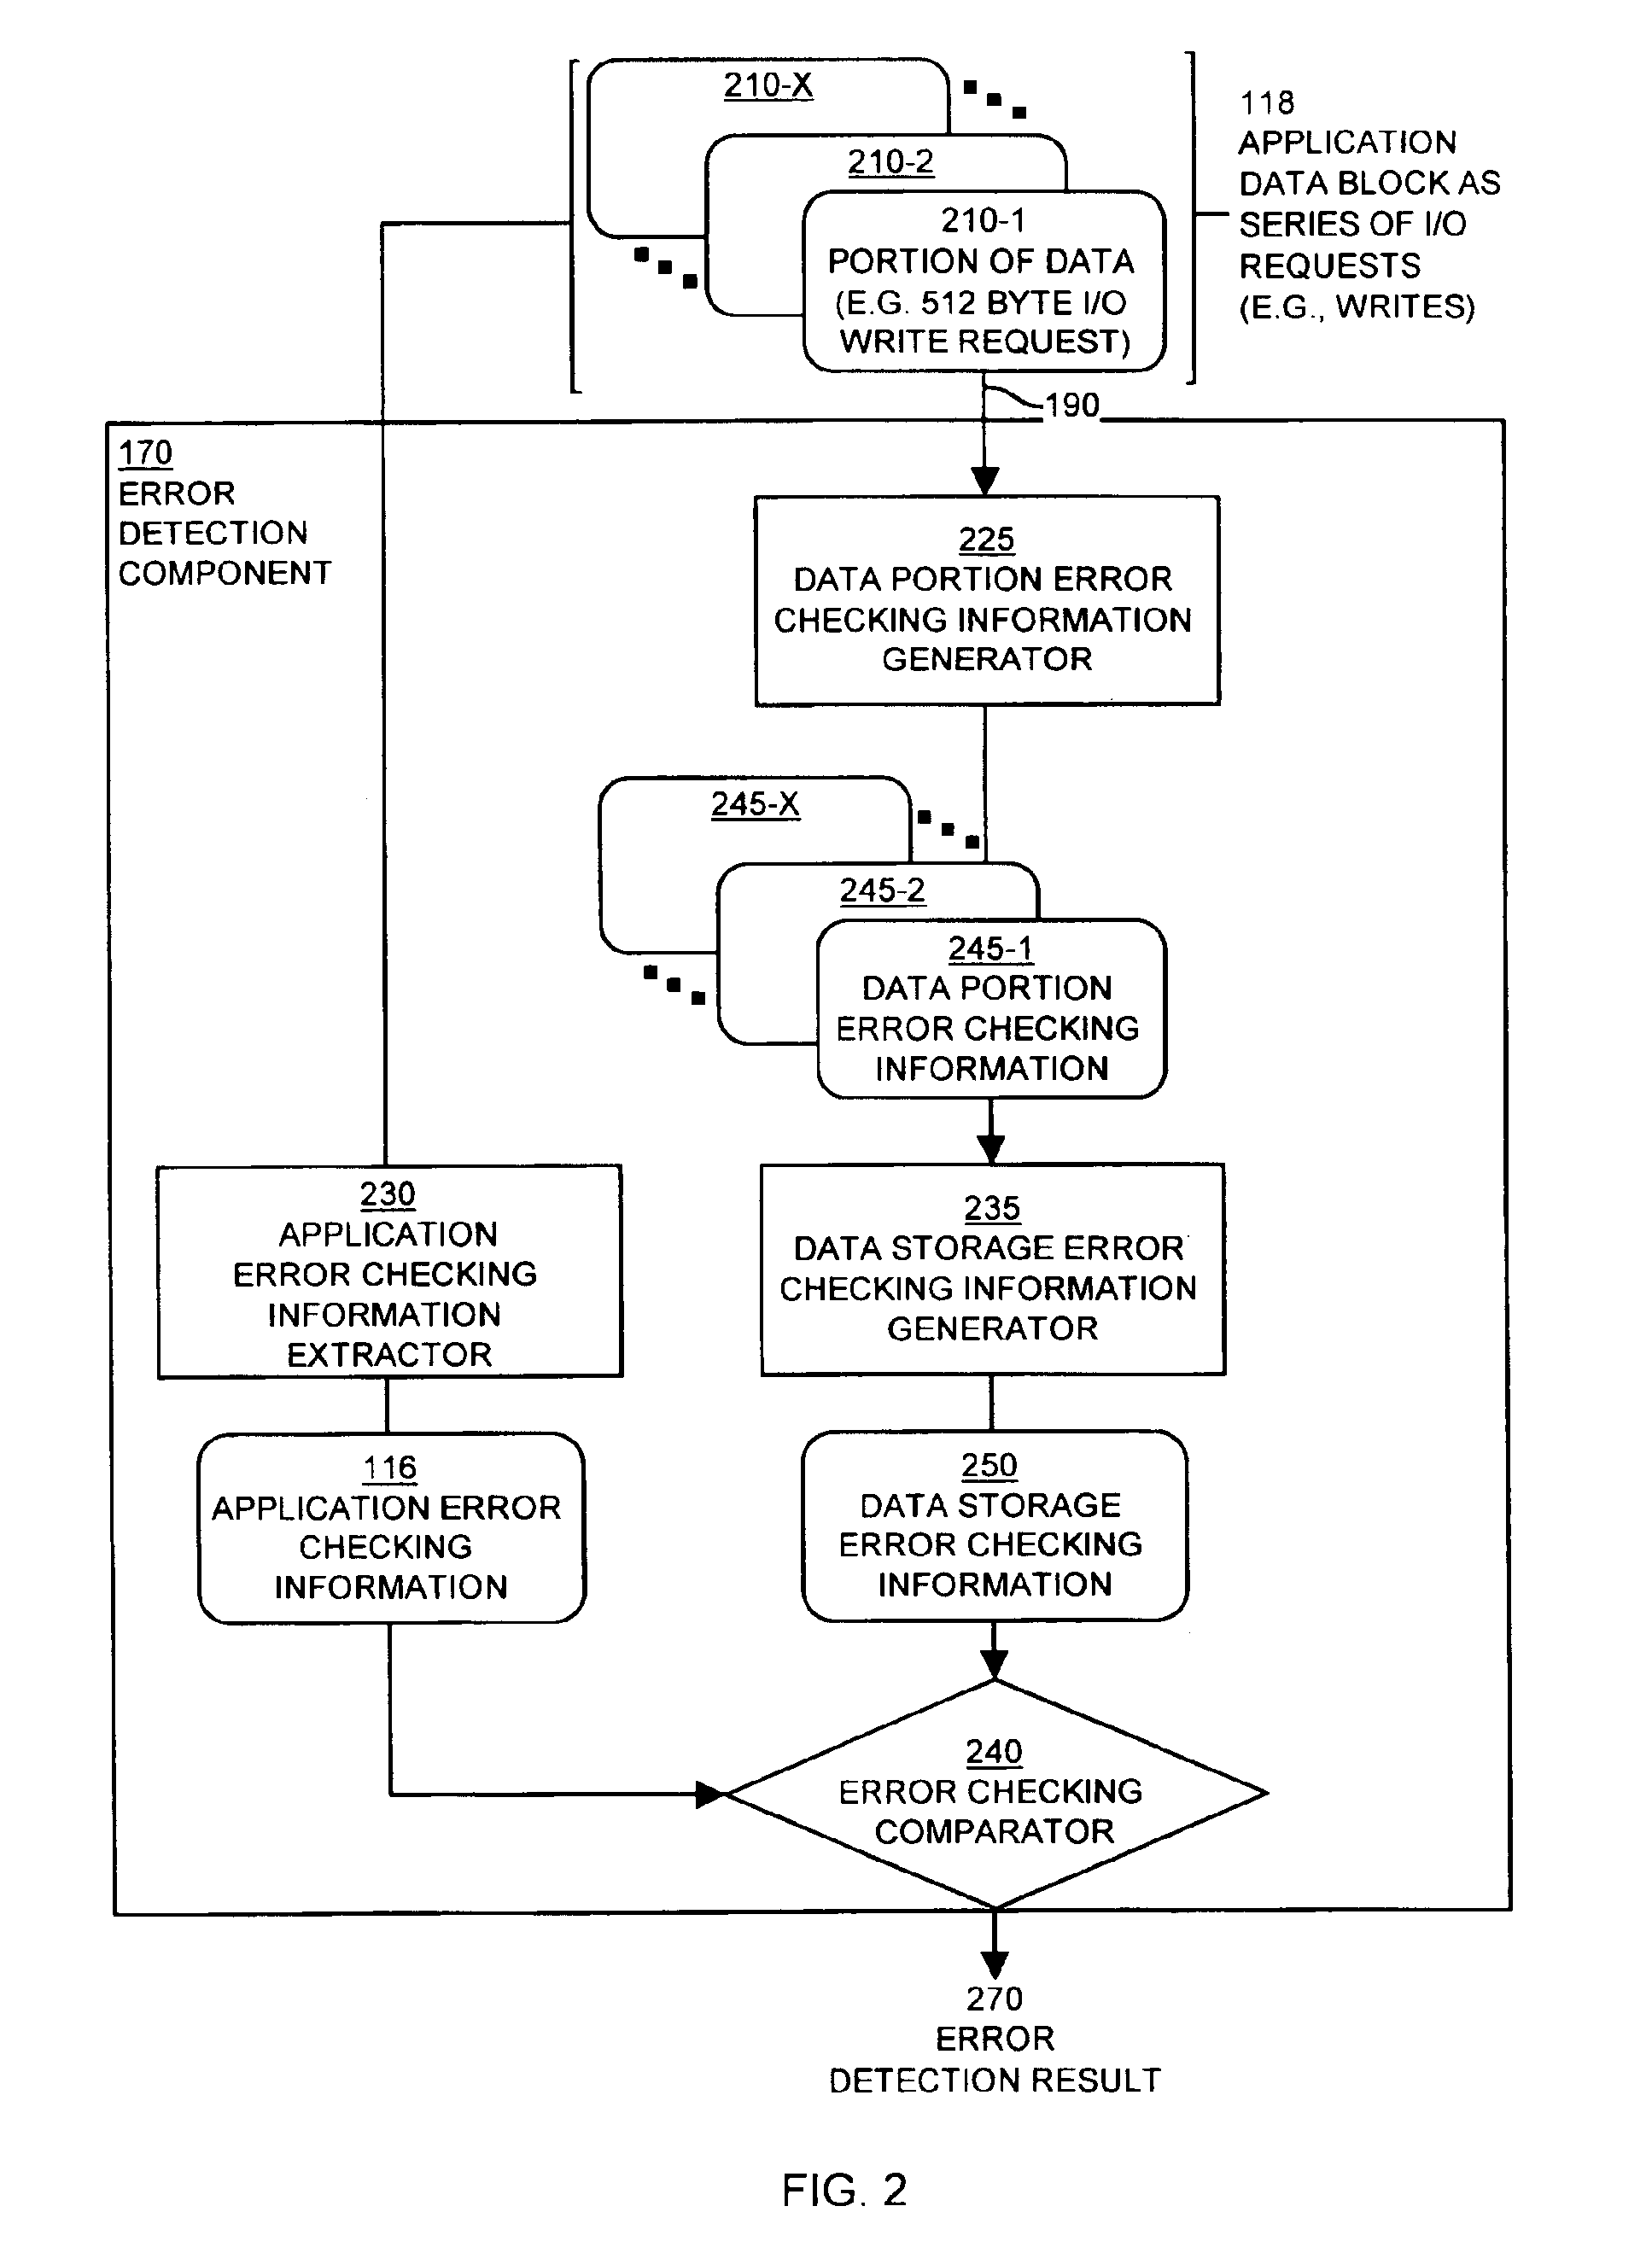 Apparatus and methods for detecting errors in data